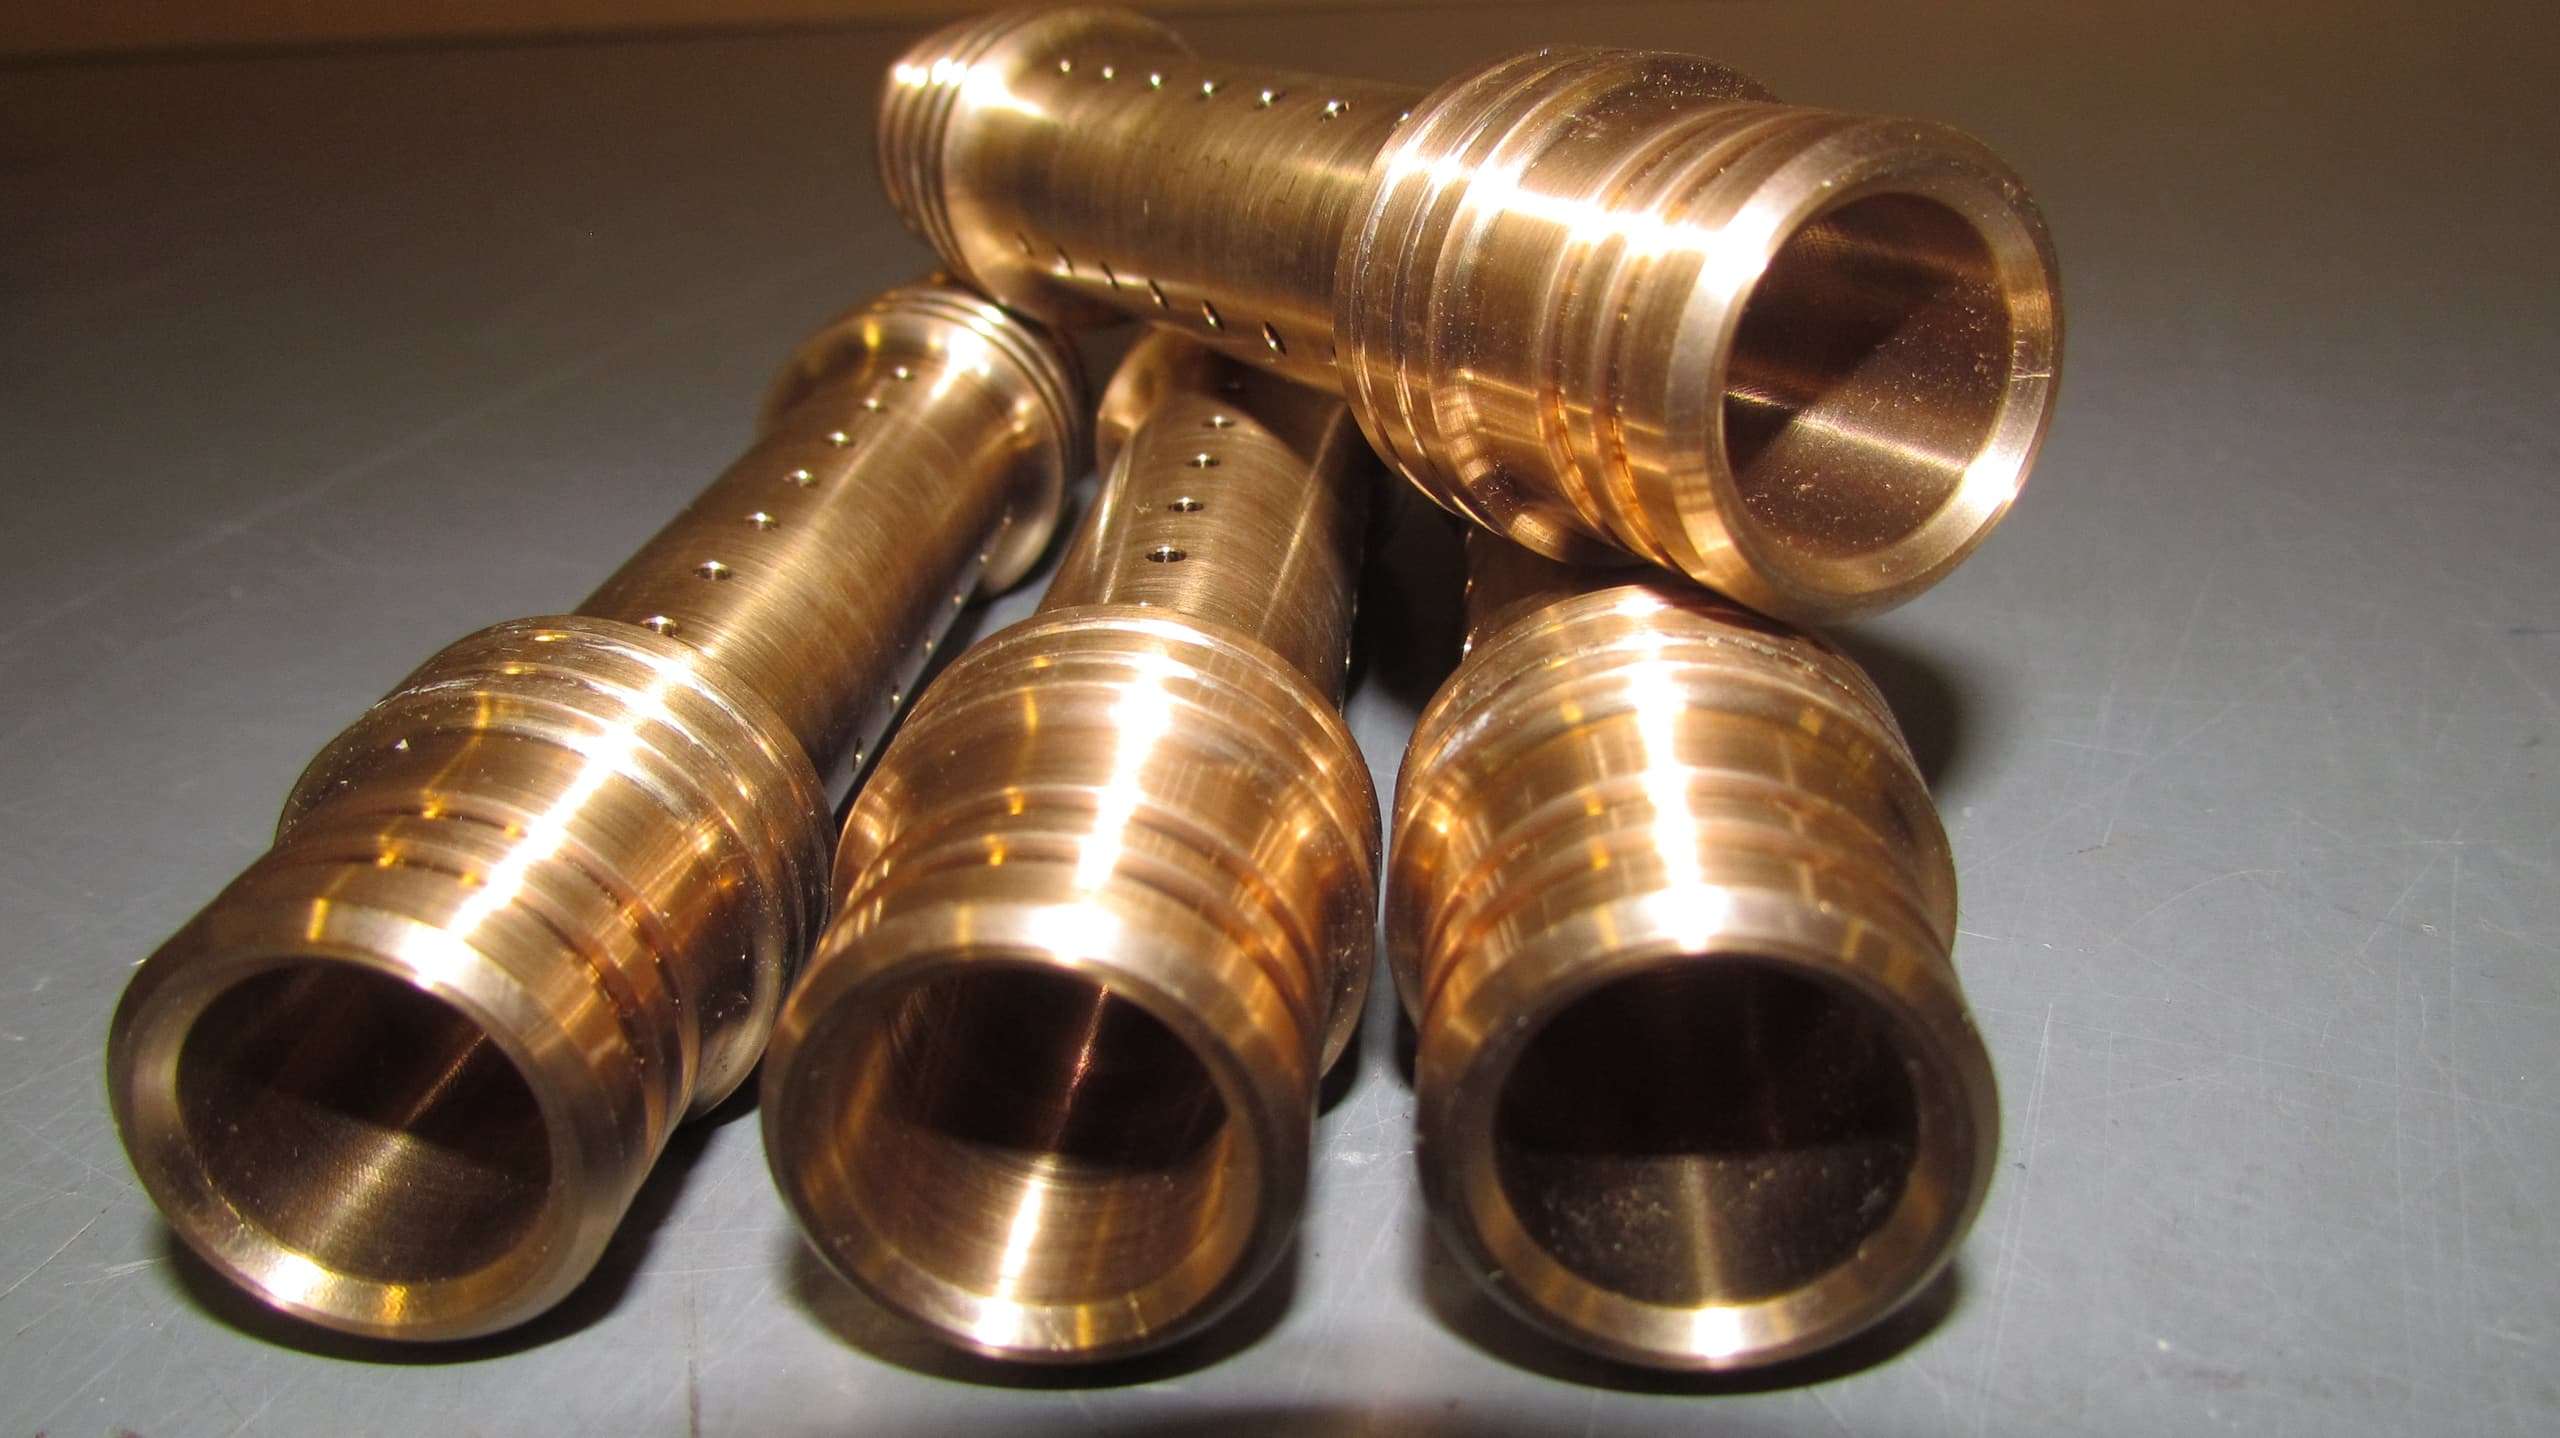 Brass tubes with threading